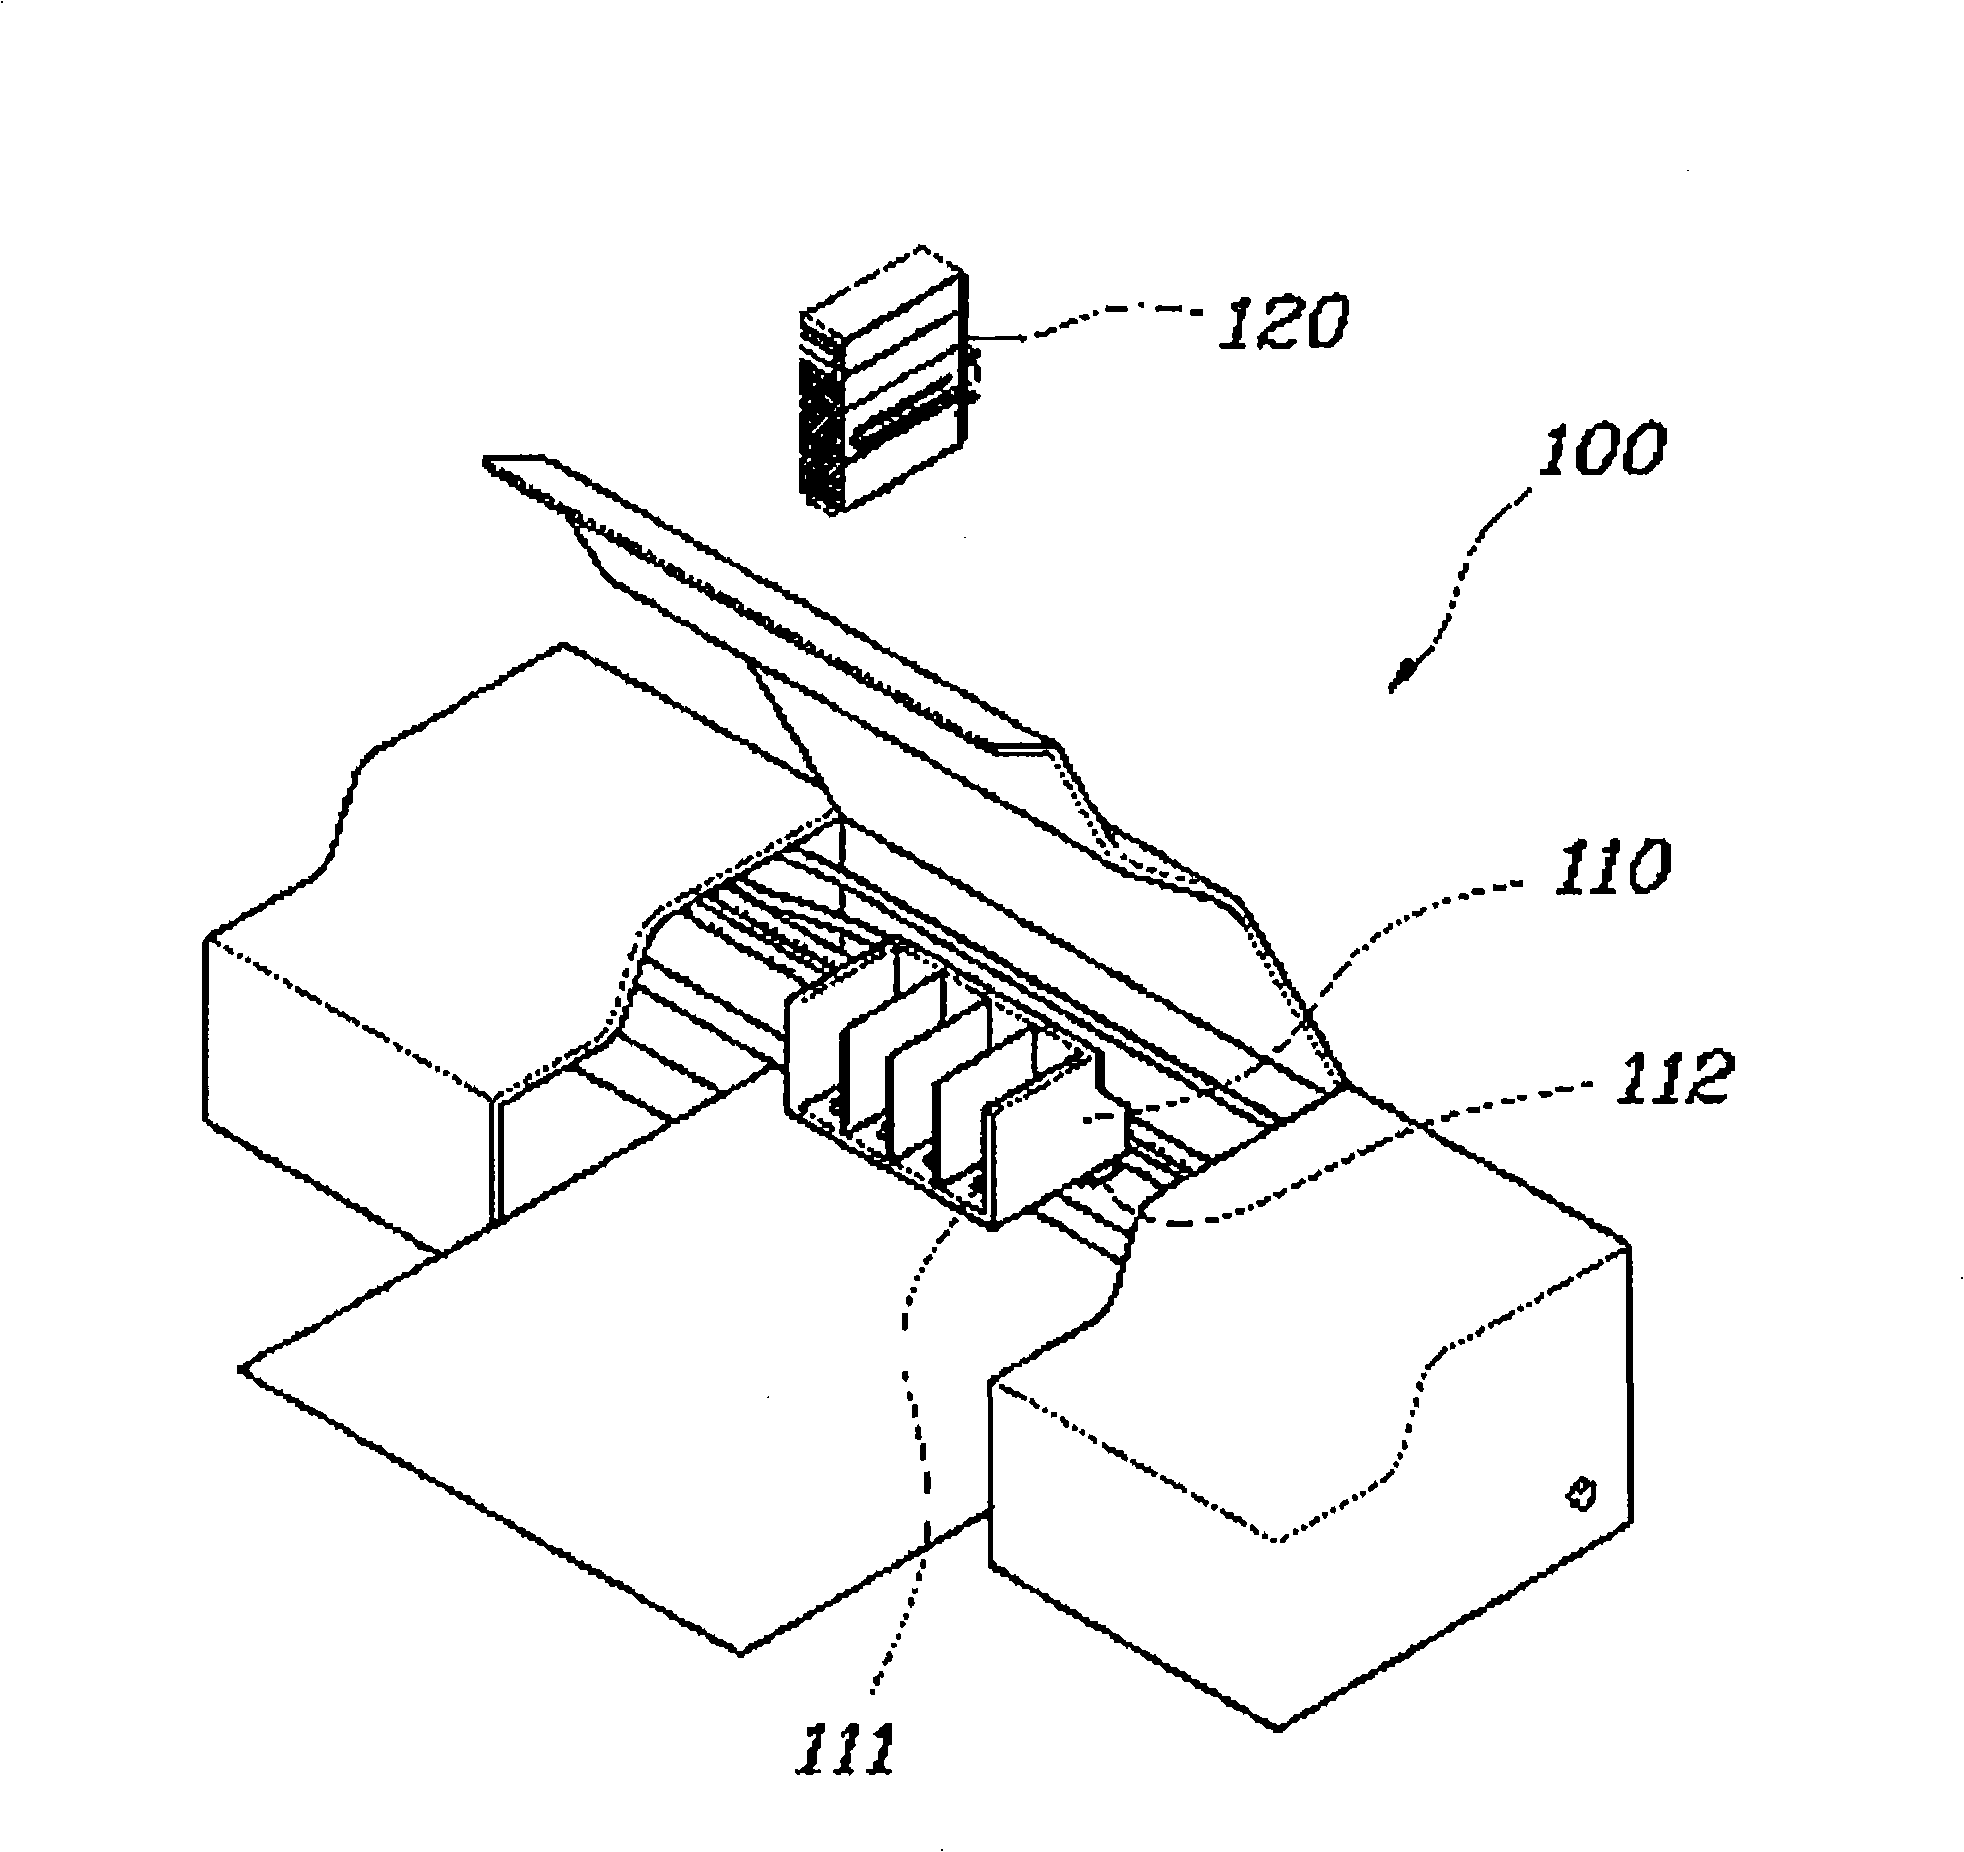 An ink-cartridge for printers